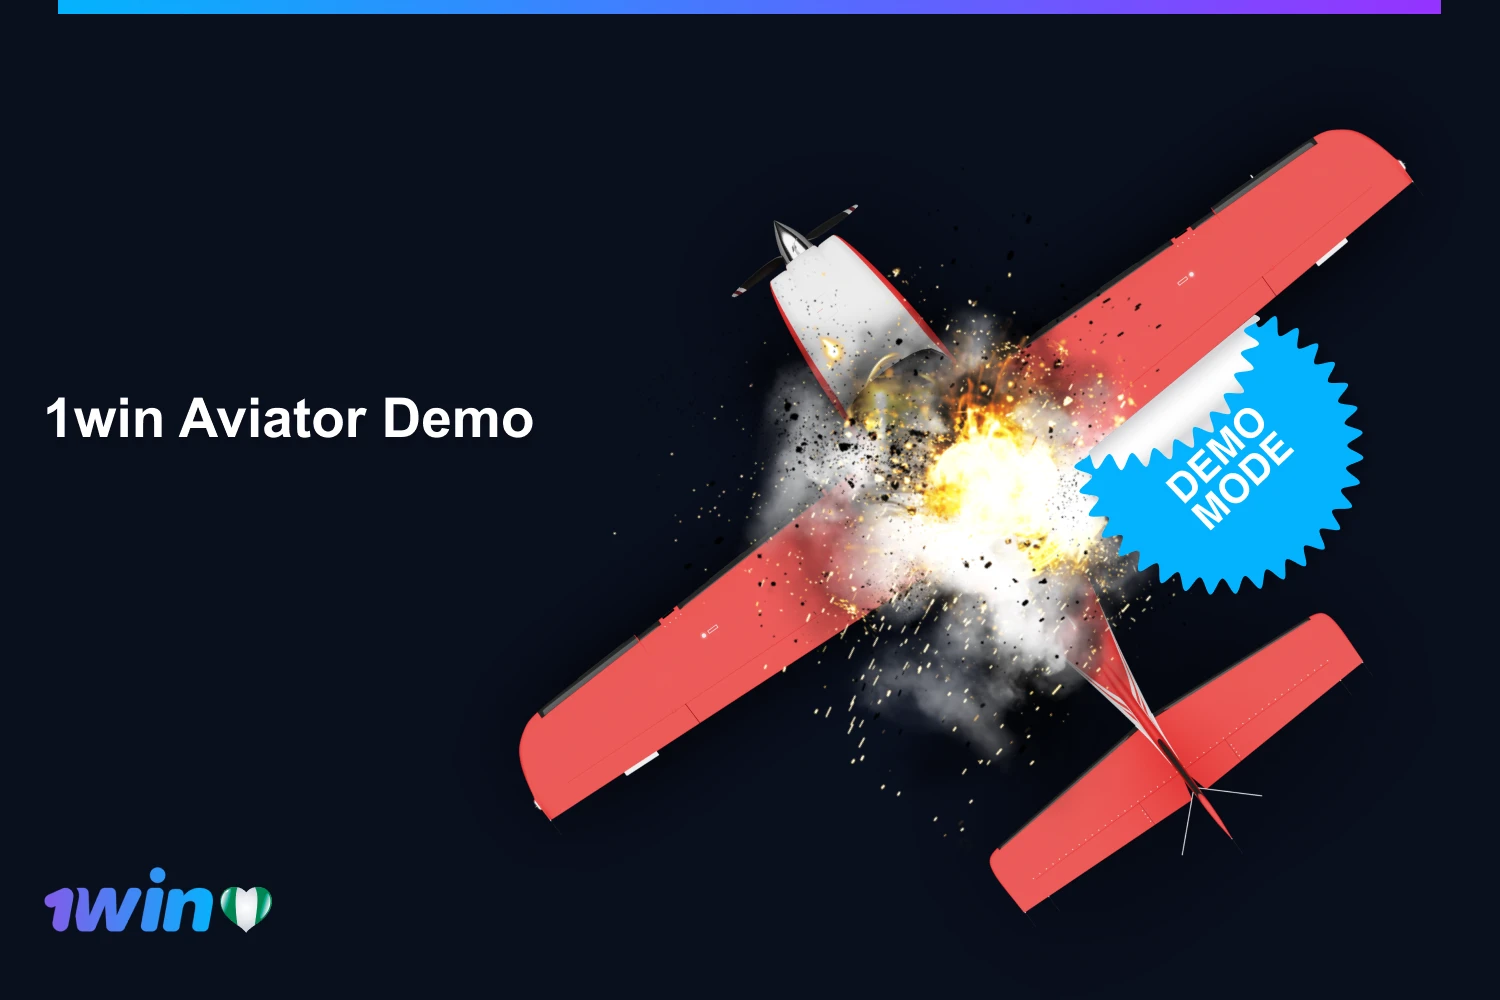 Newcomers from Nigeria can explore the game 1win Aviator in demo mode, understand the interface and functionality, learn the rules without the risk of losing money